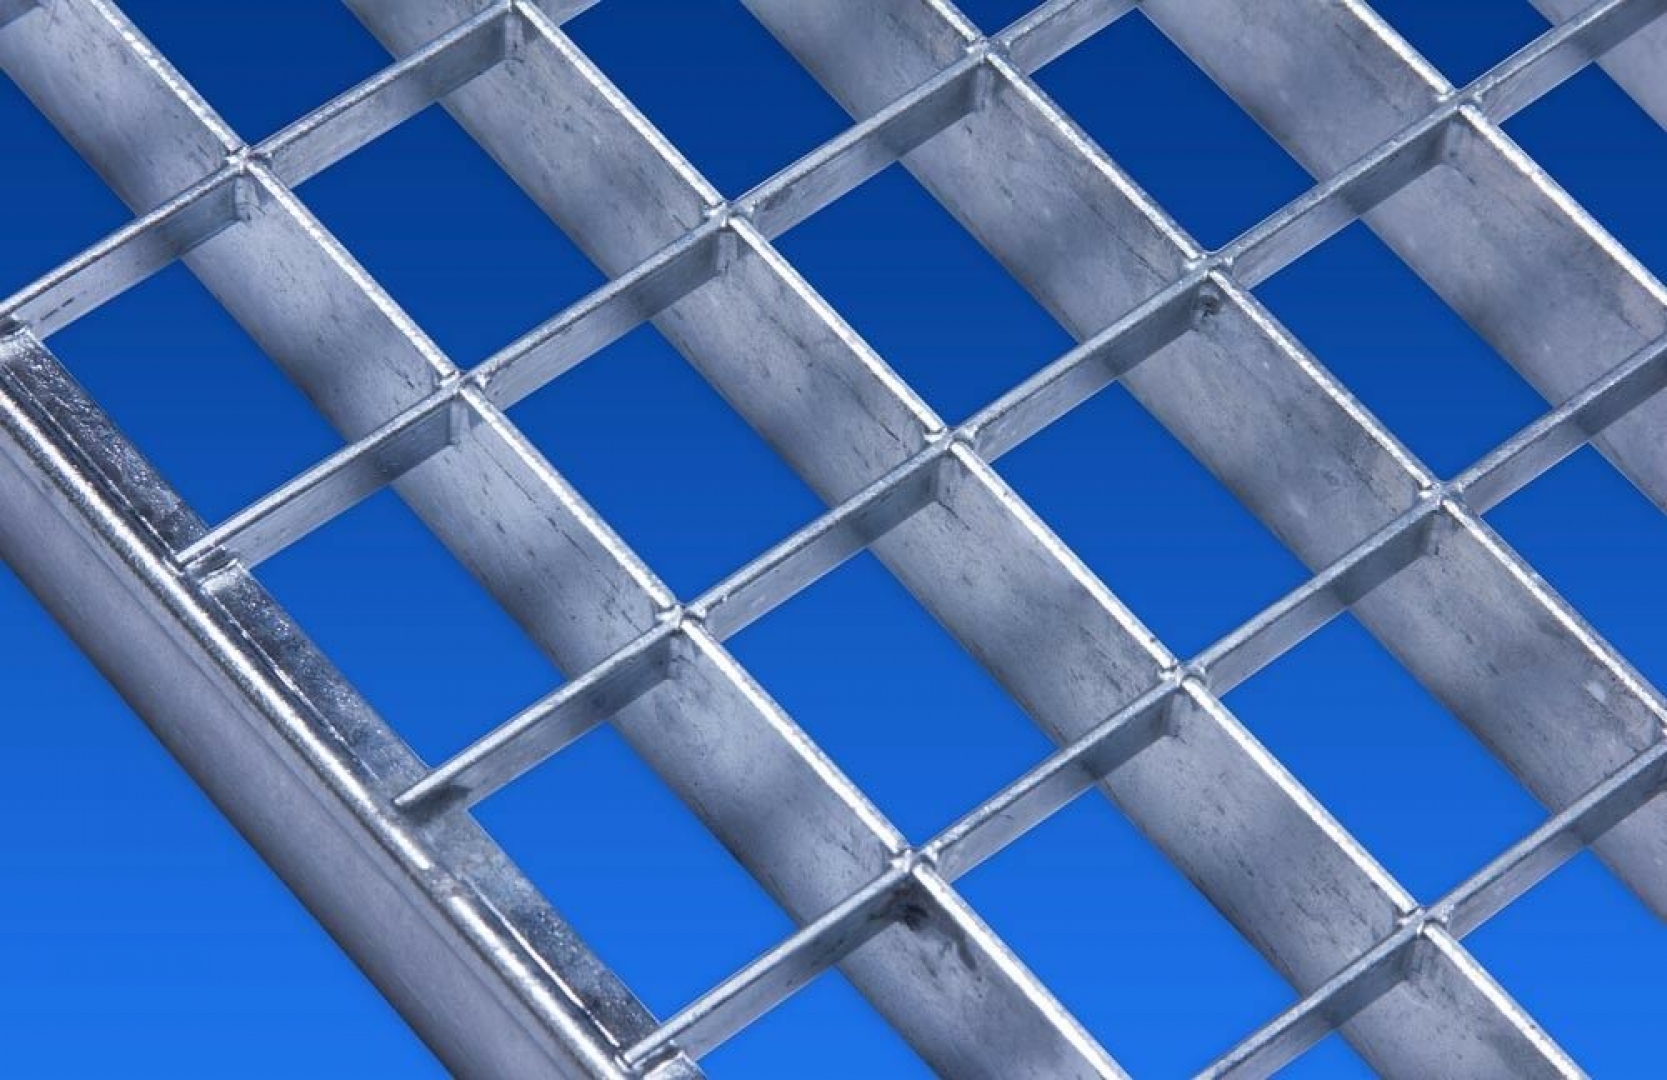 Baunorm Grating 590x790mm galvanized mesh size 30x30mm height 20mm without frame